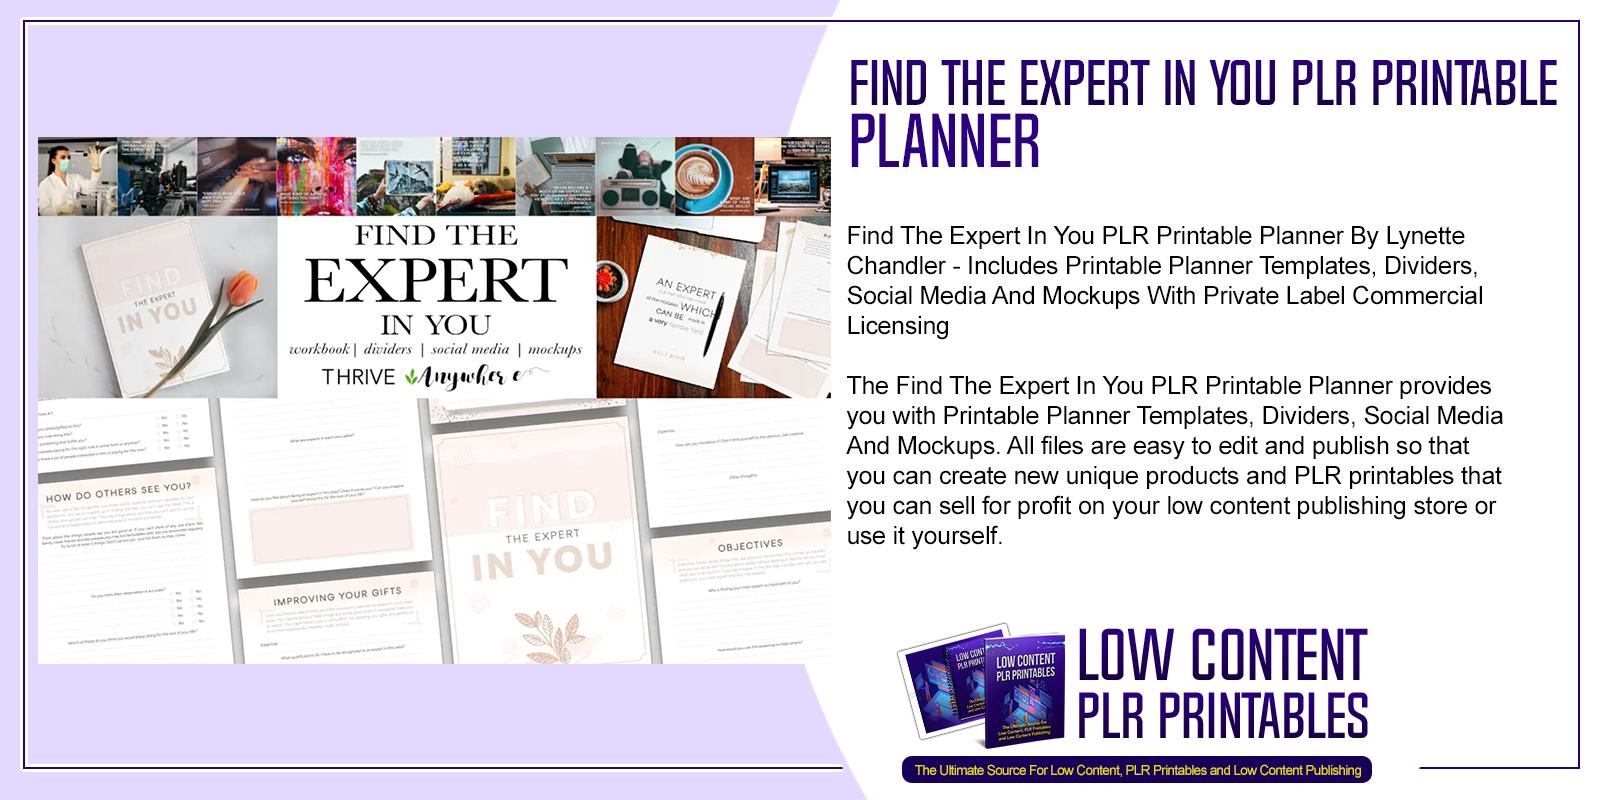 Find The Expert In You PLR Printable Planner